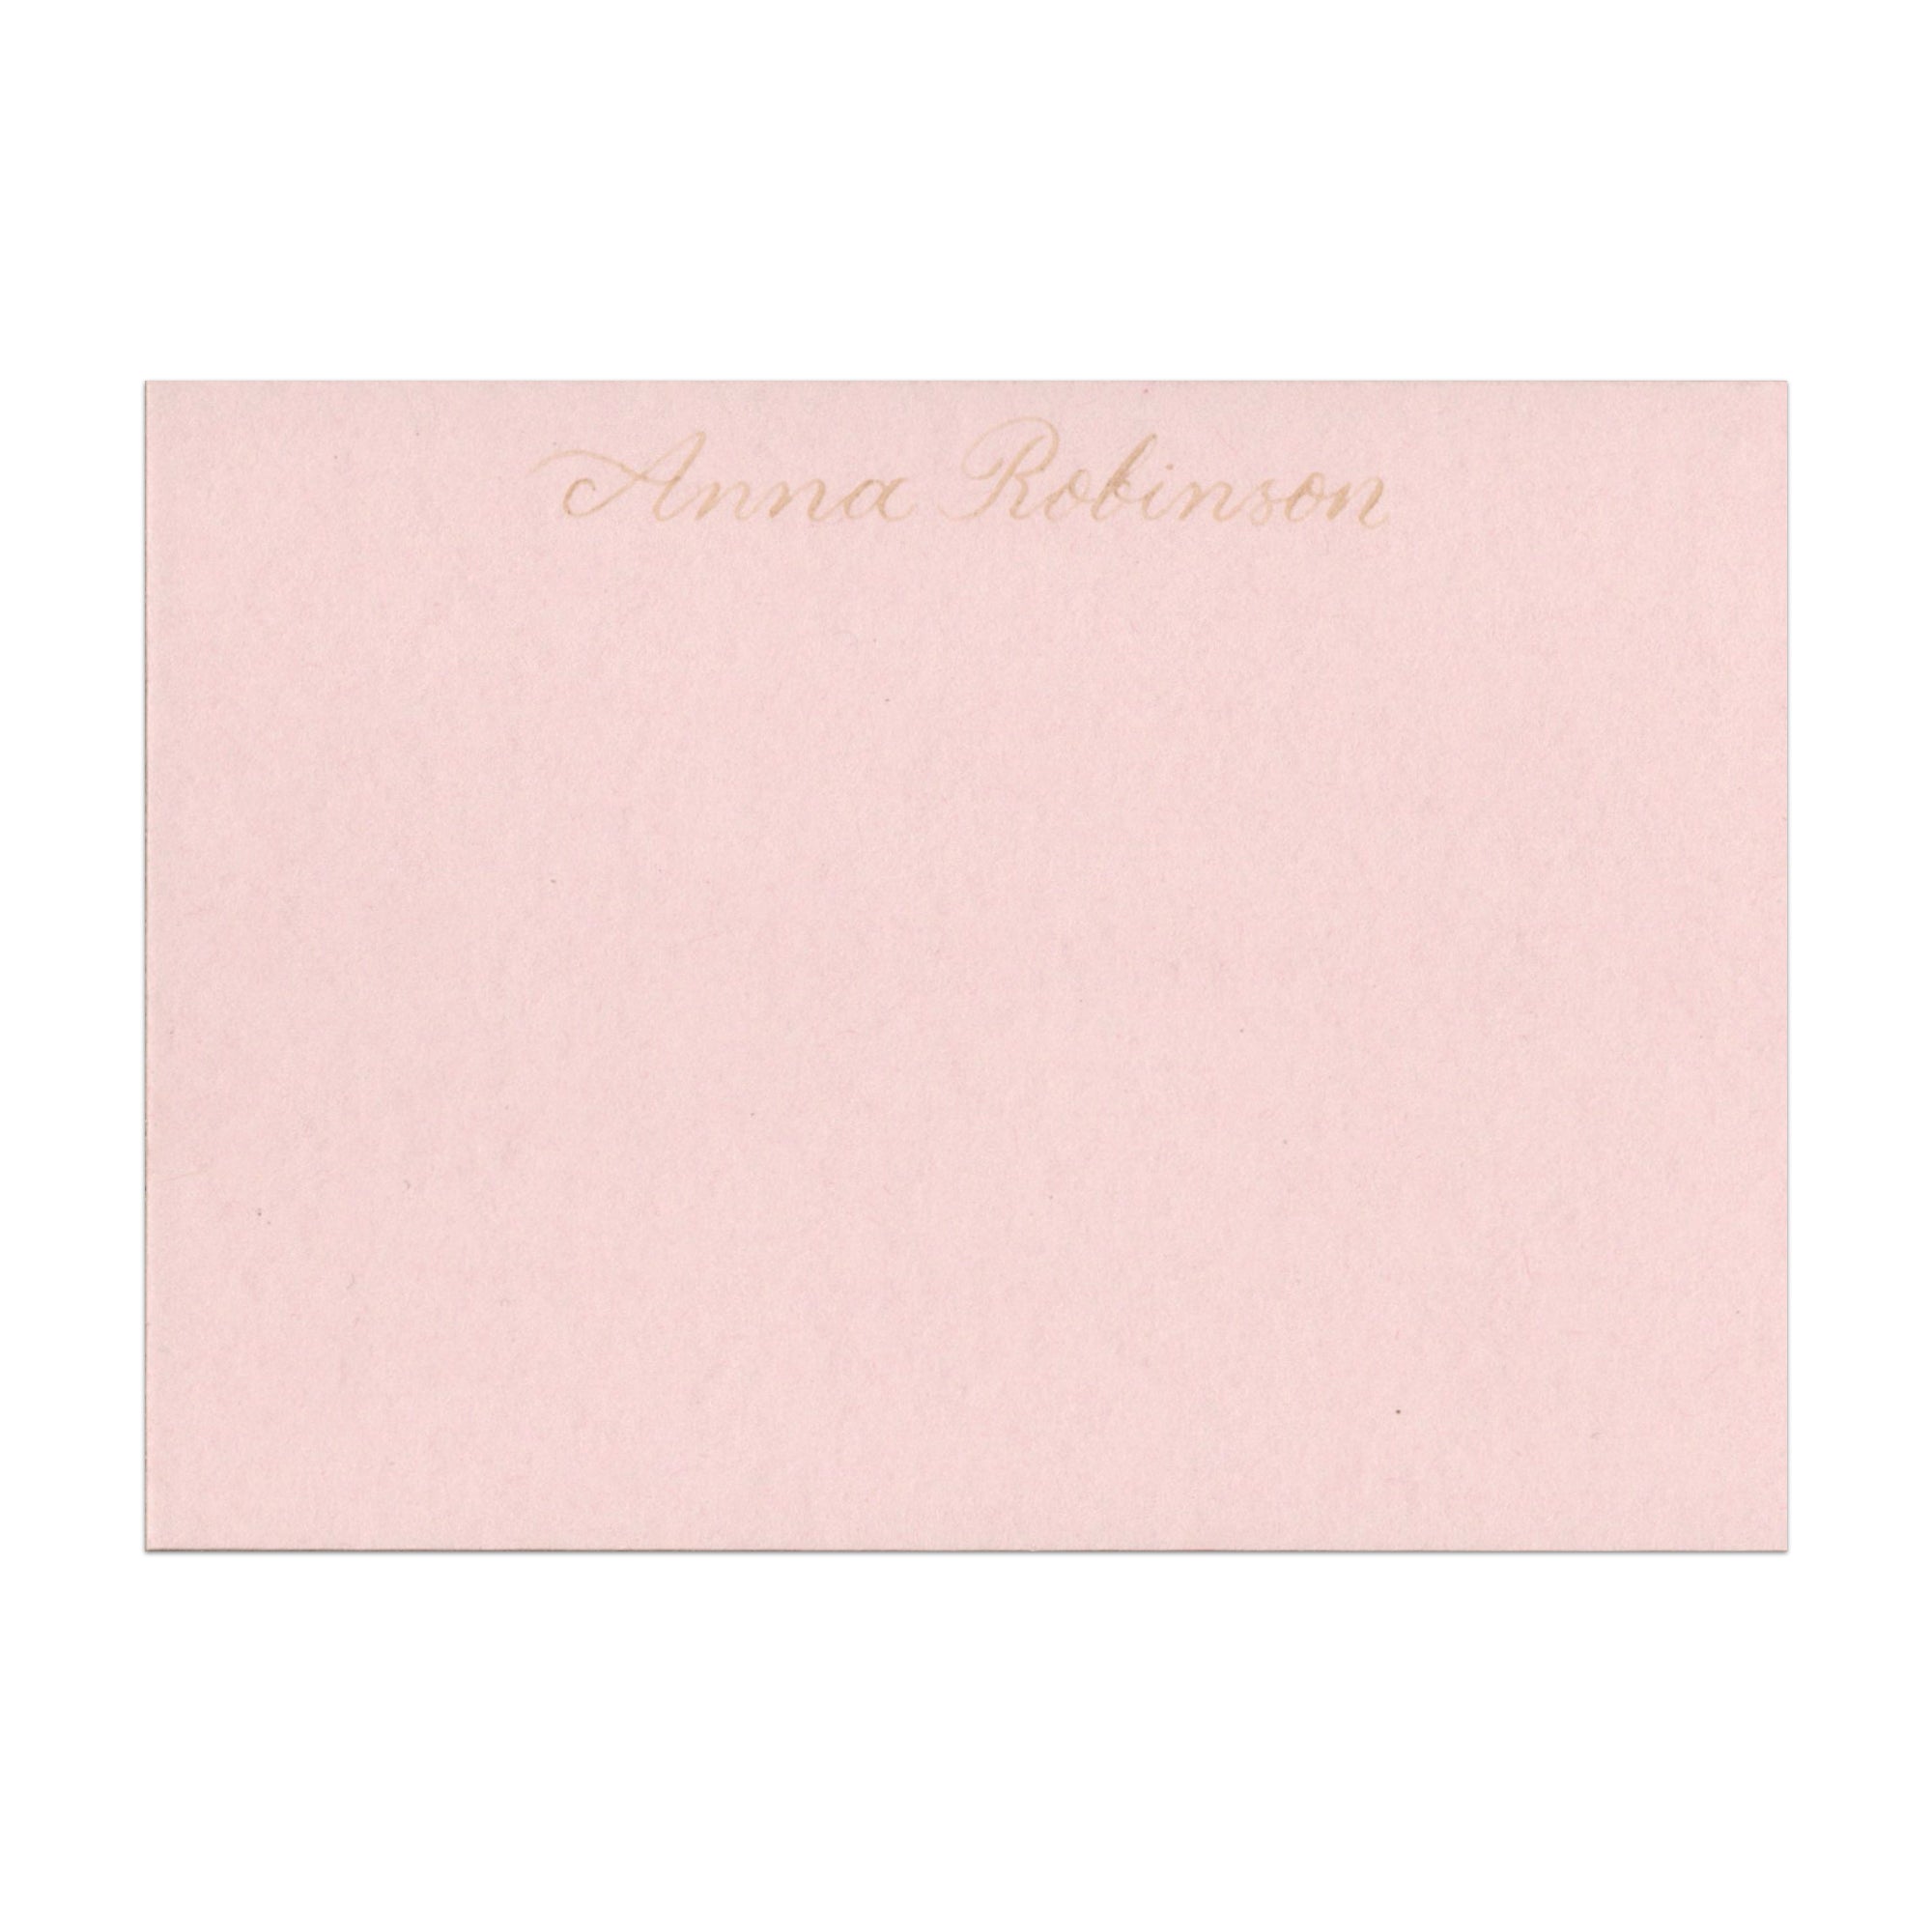 Personalised Note Cards in Shell